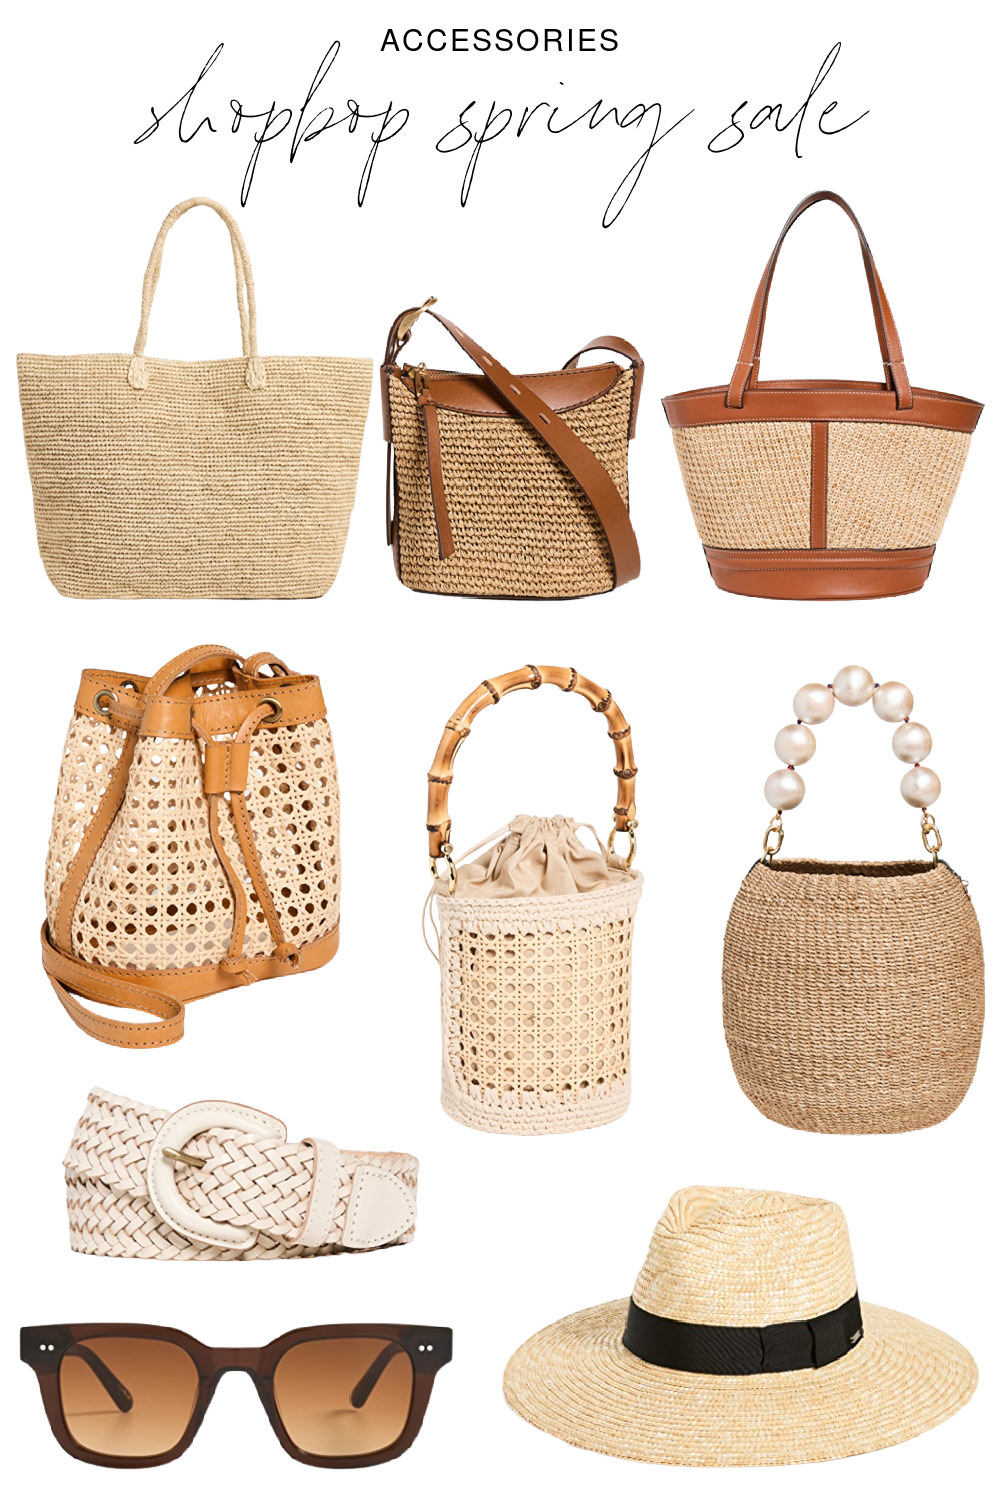 bags accessories and hats at the shopbop spring 2023 sale